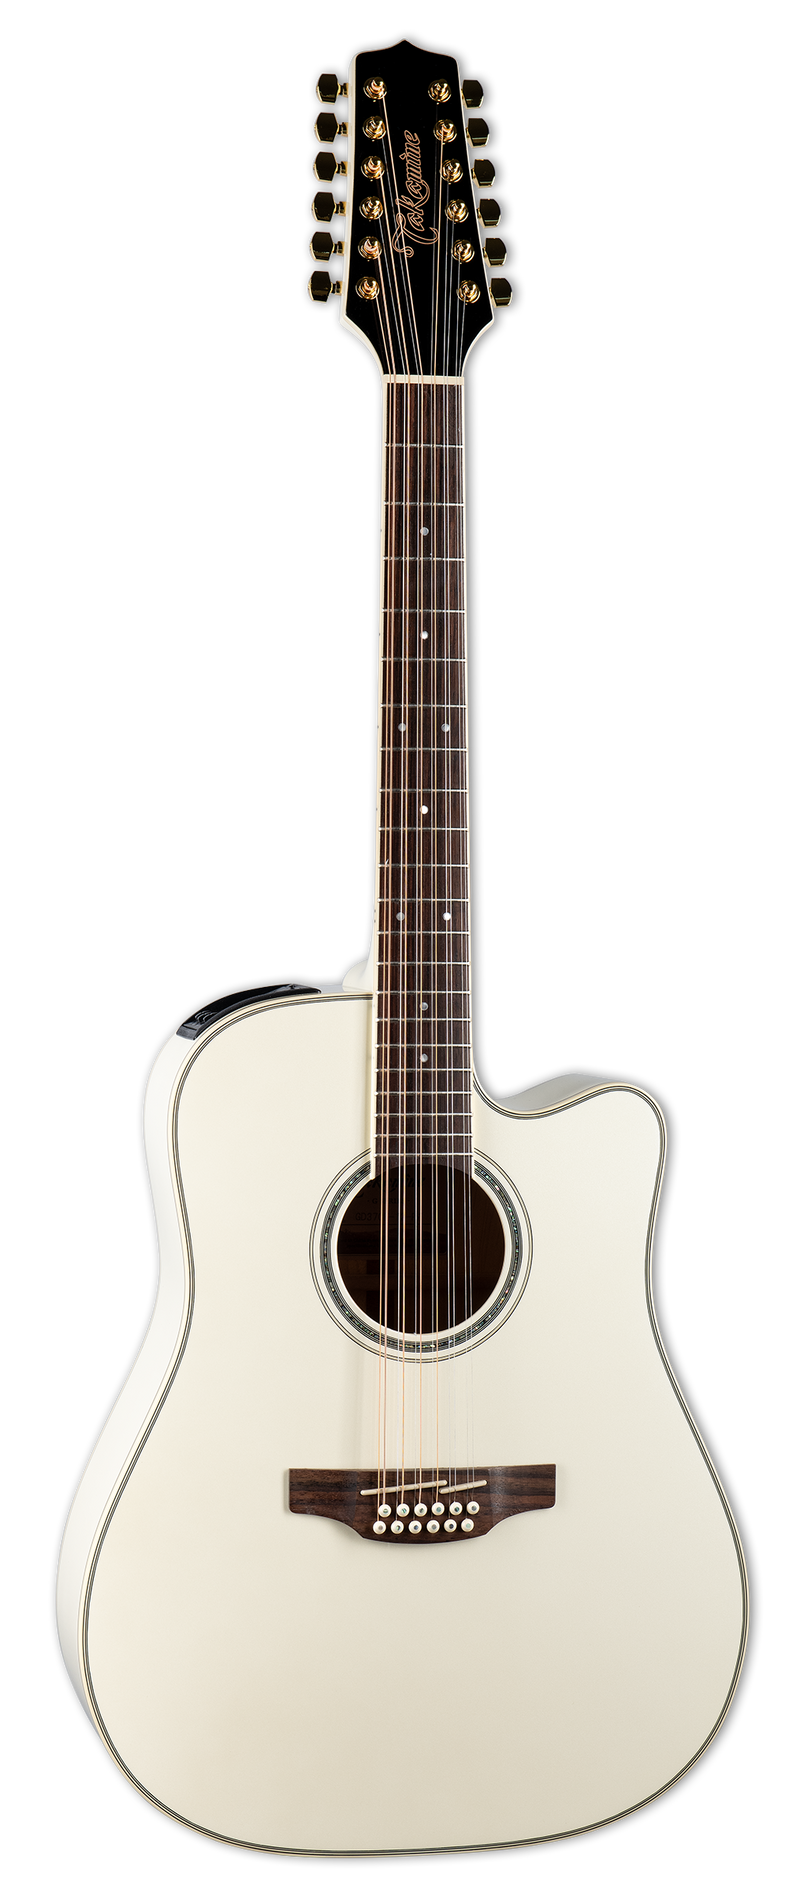 Takamine GD37CE12-PW G Series 12-Strings Acoustic Guitar (Pearl White)